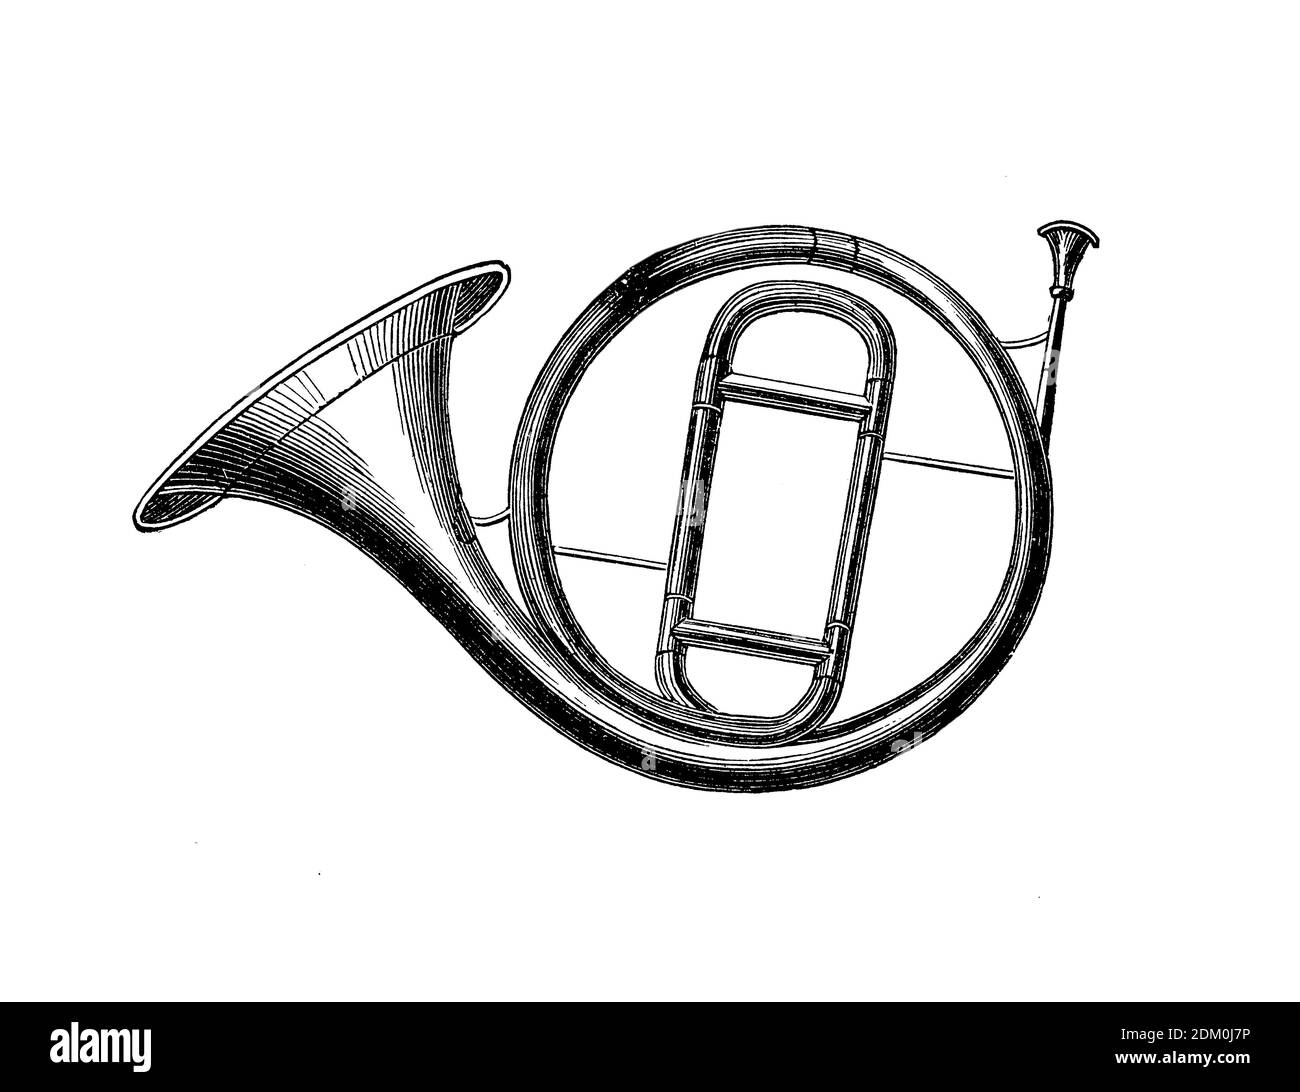 Musical instruments: horn metal made curved with a central crook  and a conical aperture Stock Photo